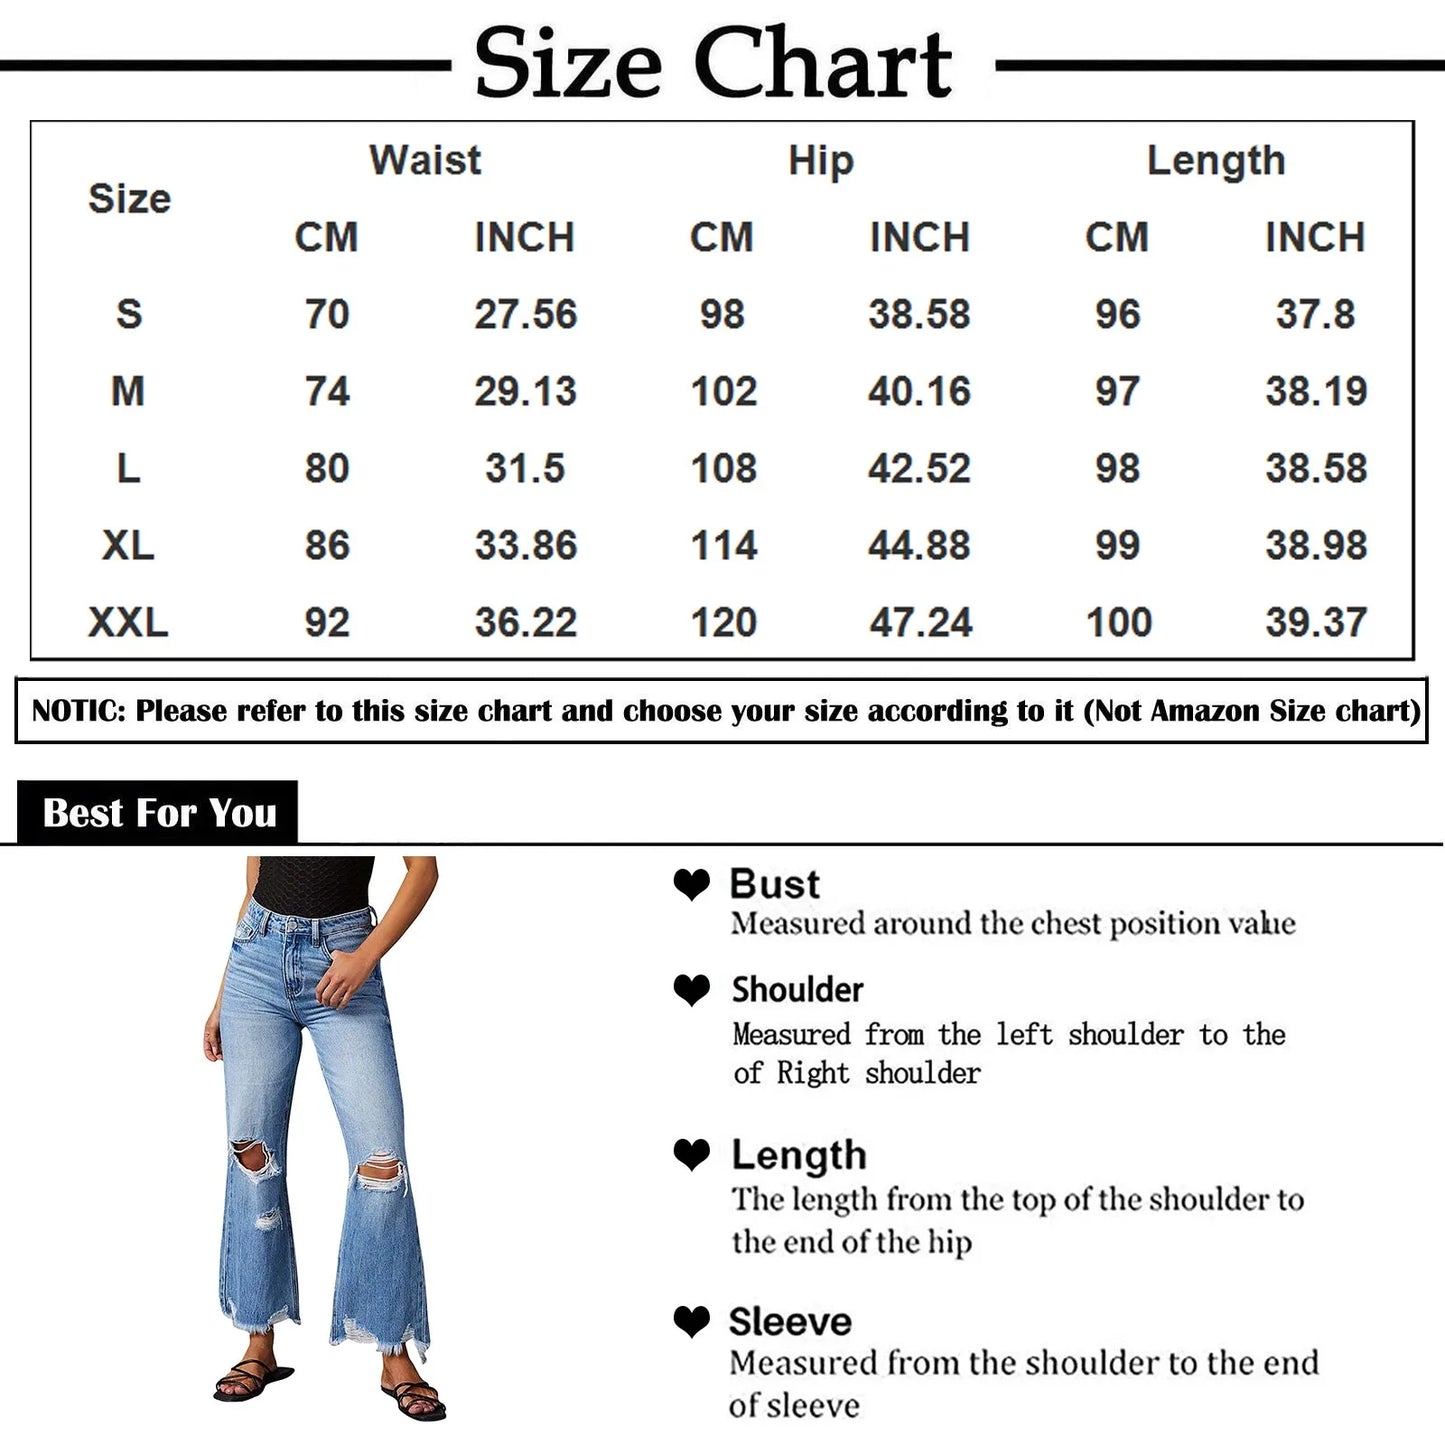 Fashion Broken Holes Jeans Tassel Bootcut Jeans Women'S Daily Casual All-Match Street Style Cropped Pants Commuter Denim Pants